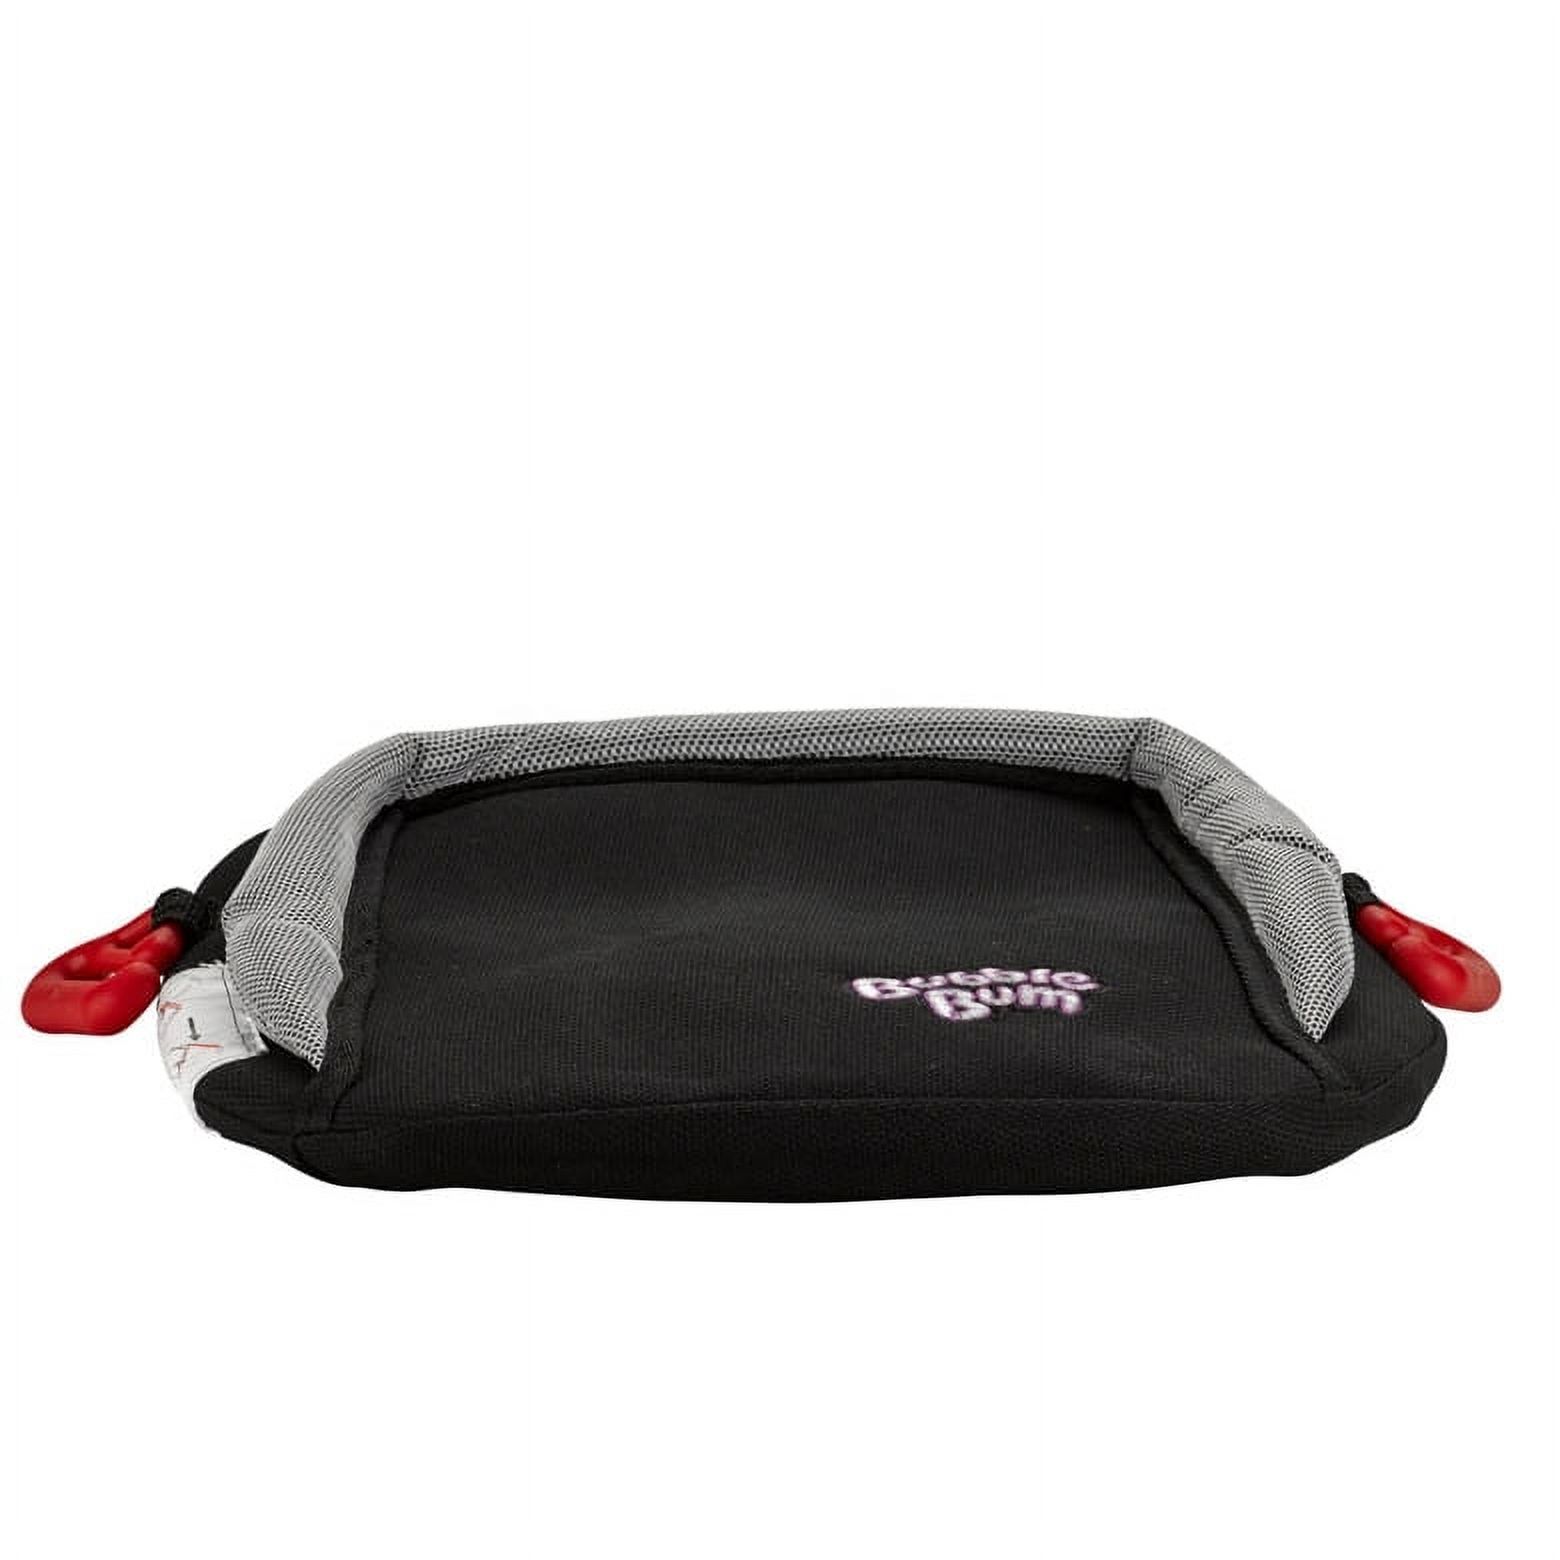 Bubblebum Backless Booster Car Seat, Black - image 2 of 7